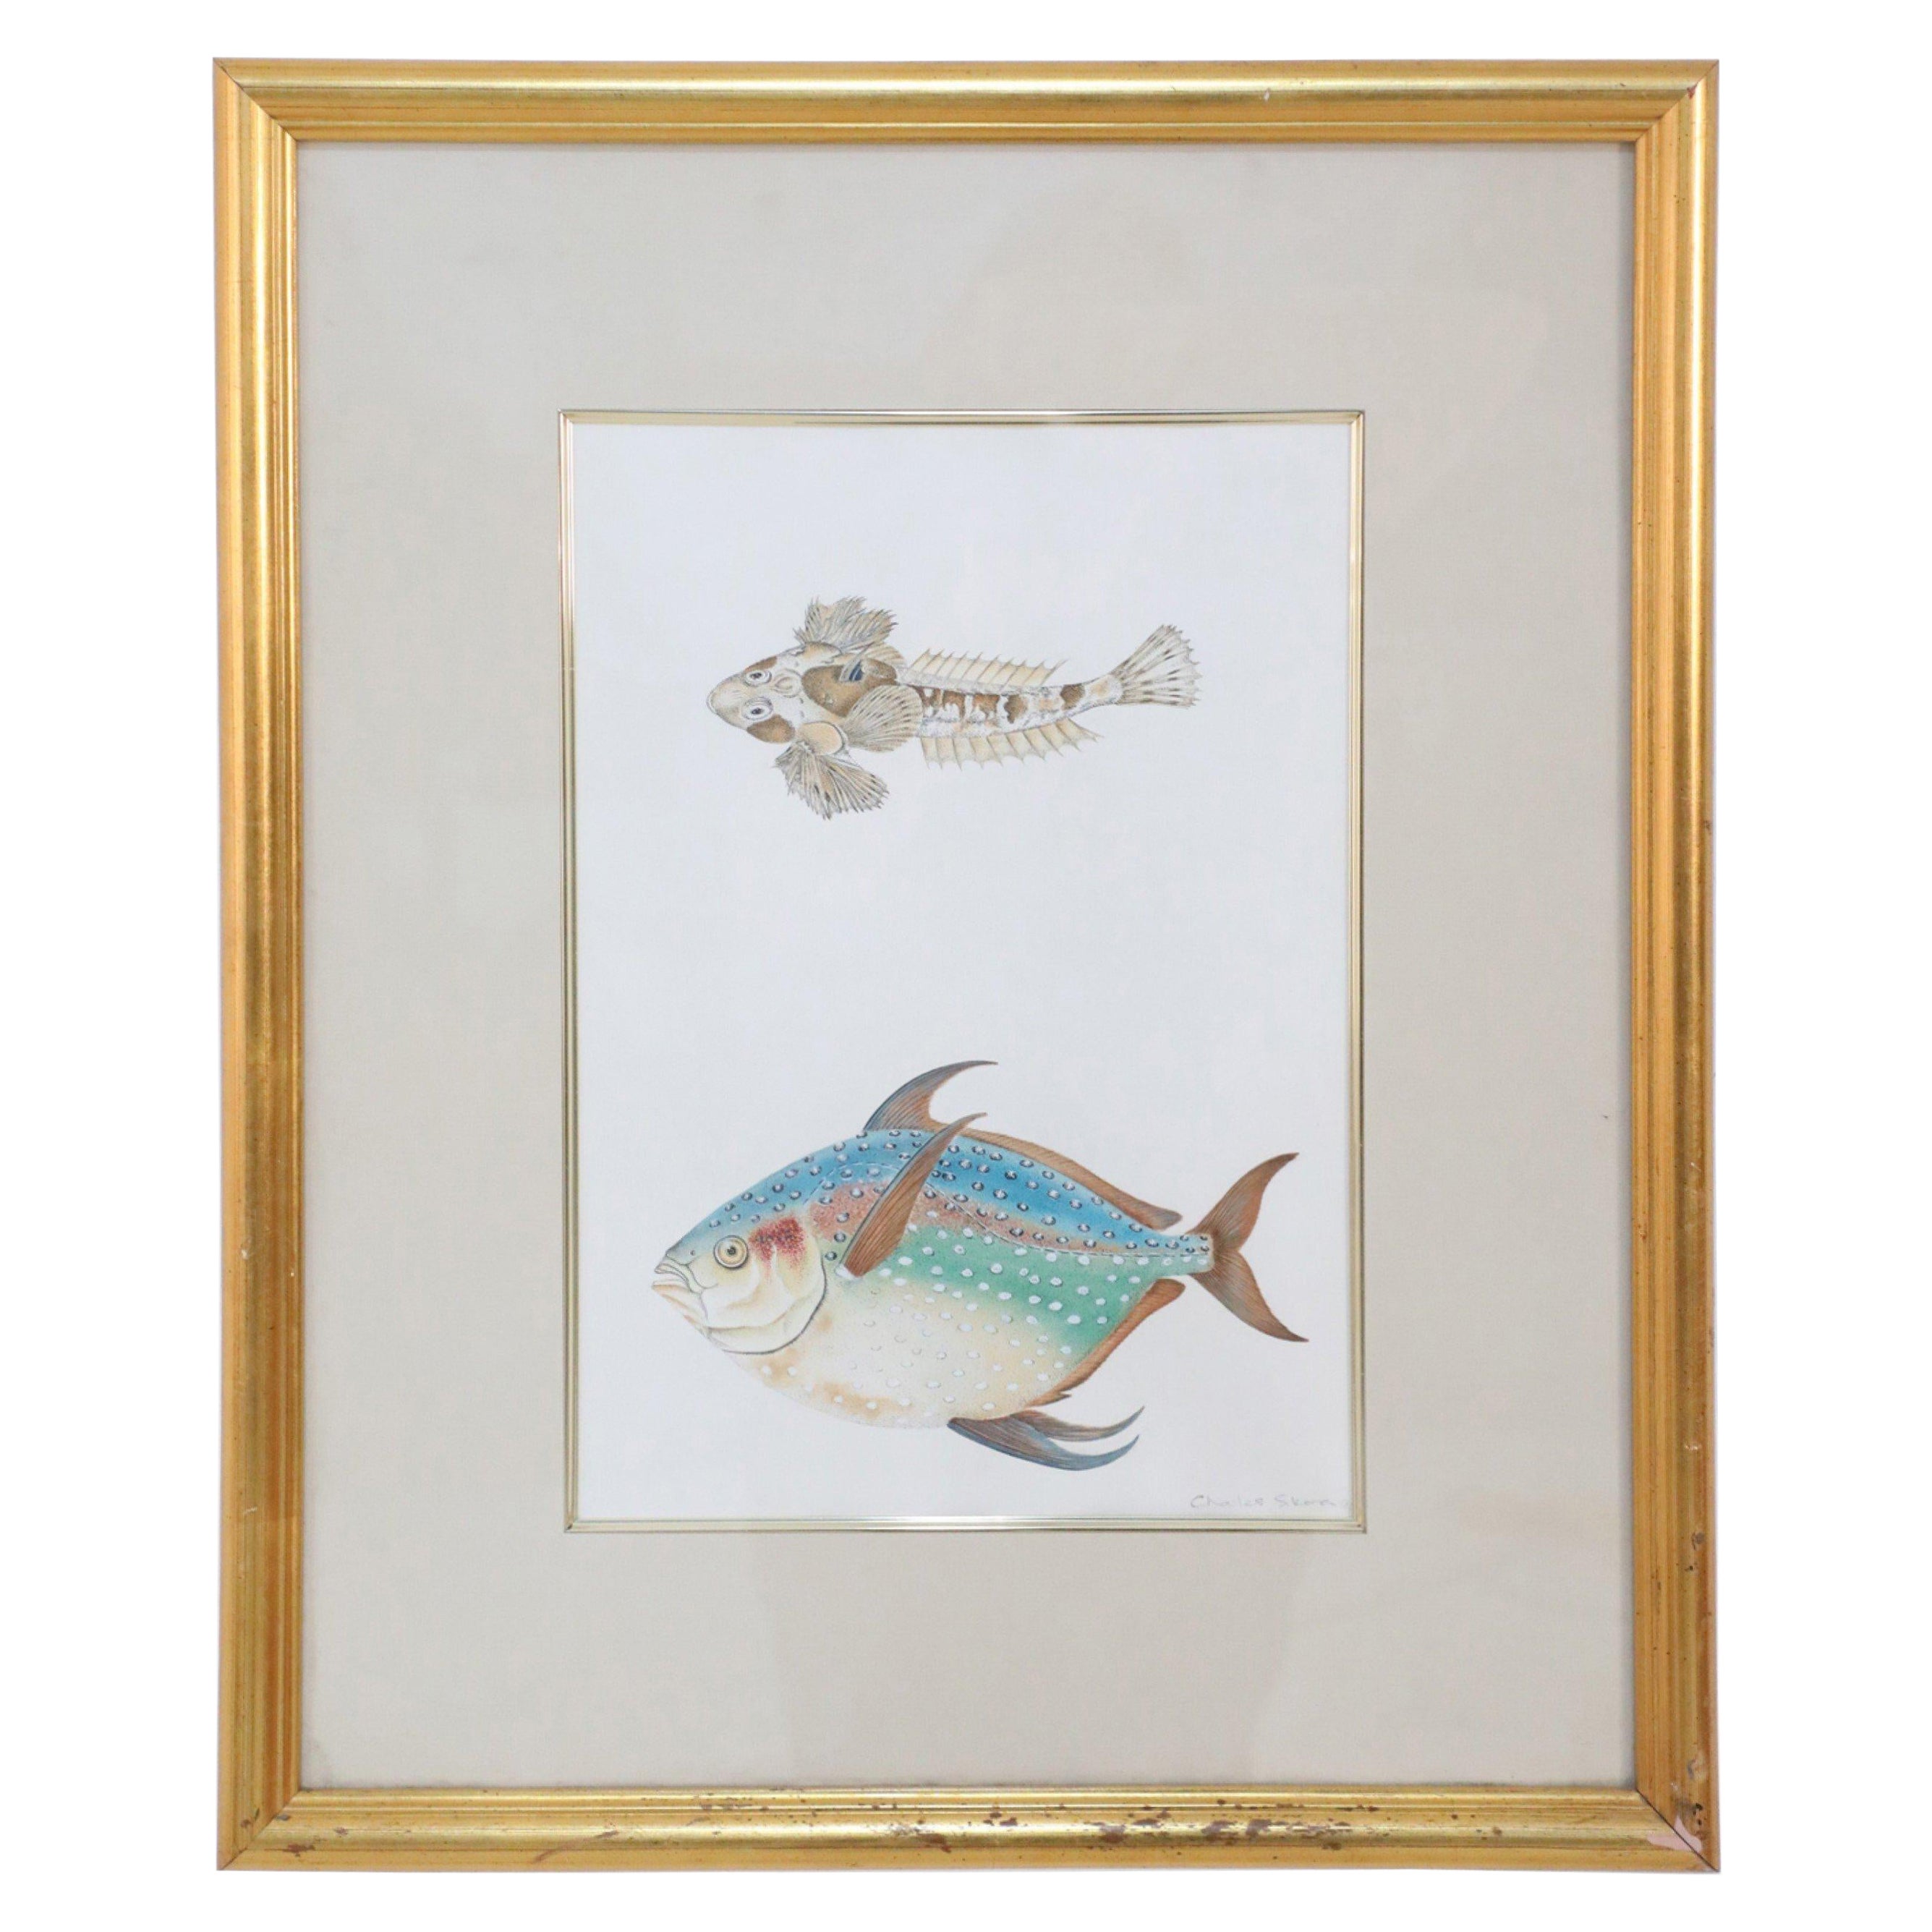 Framed Color Lithograph of Brown and Multi-Colored Tropical Fish